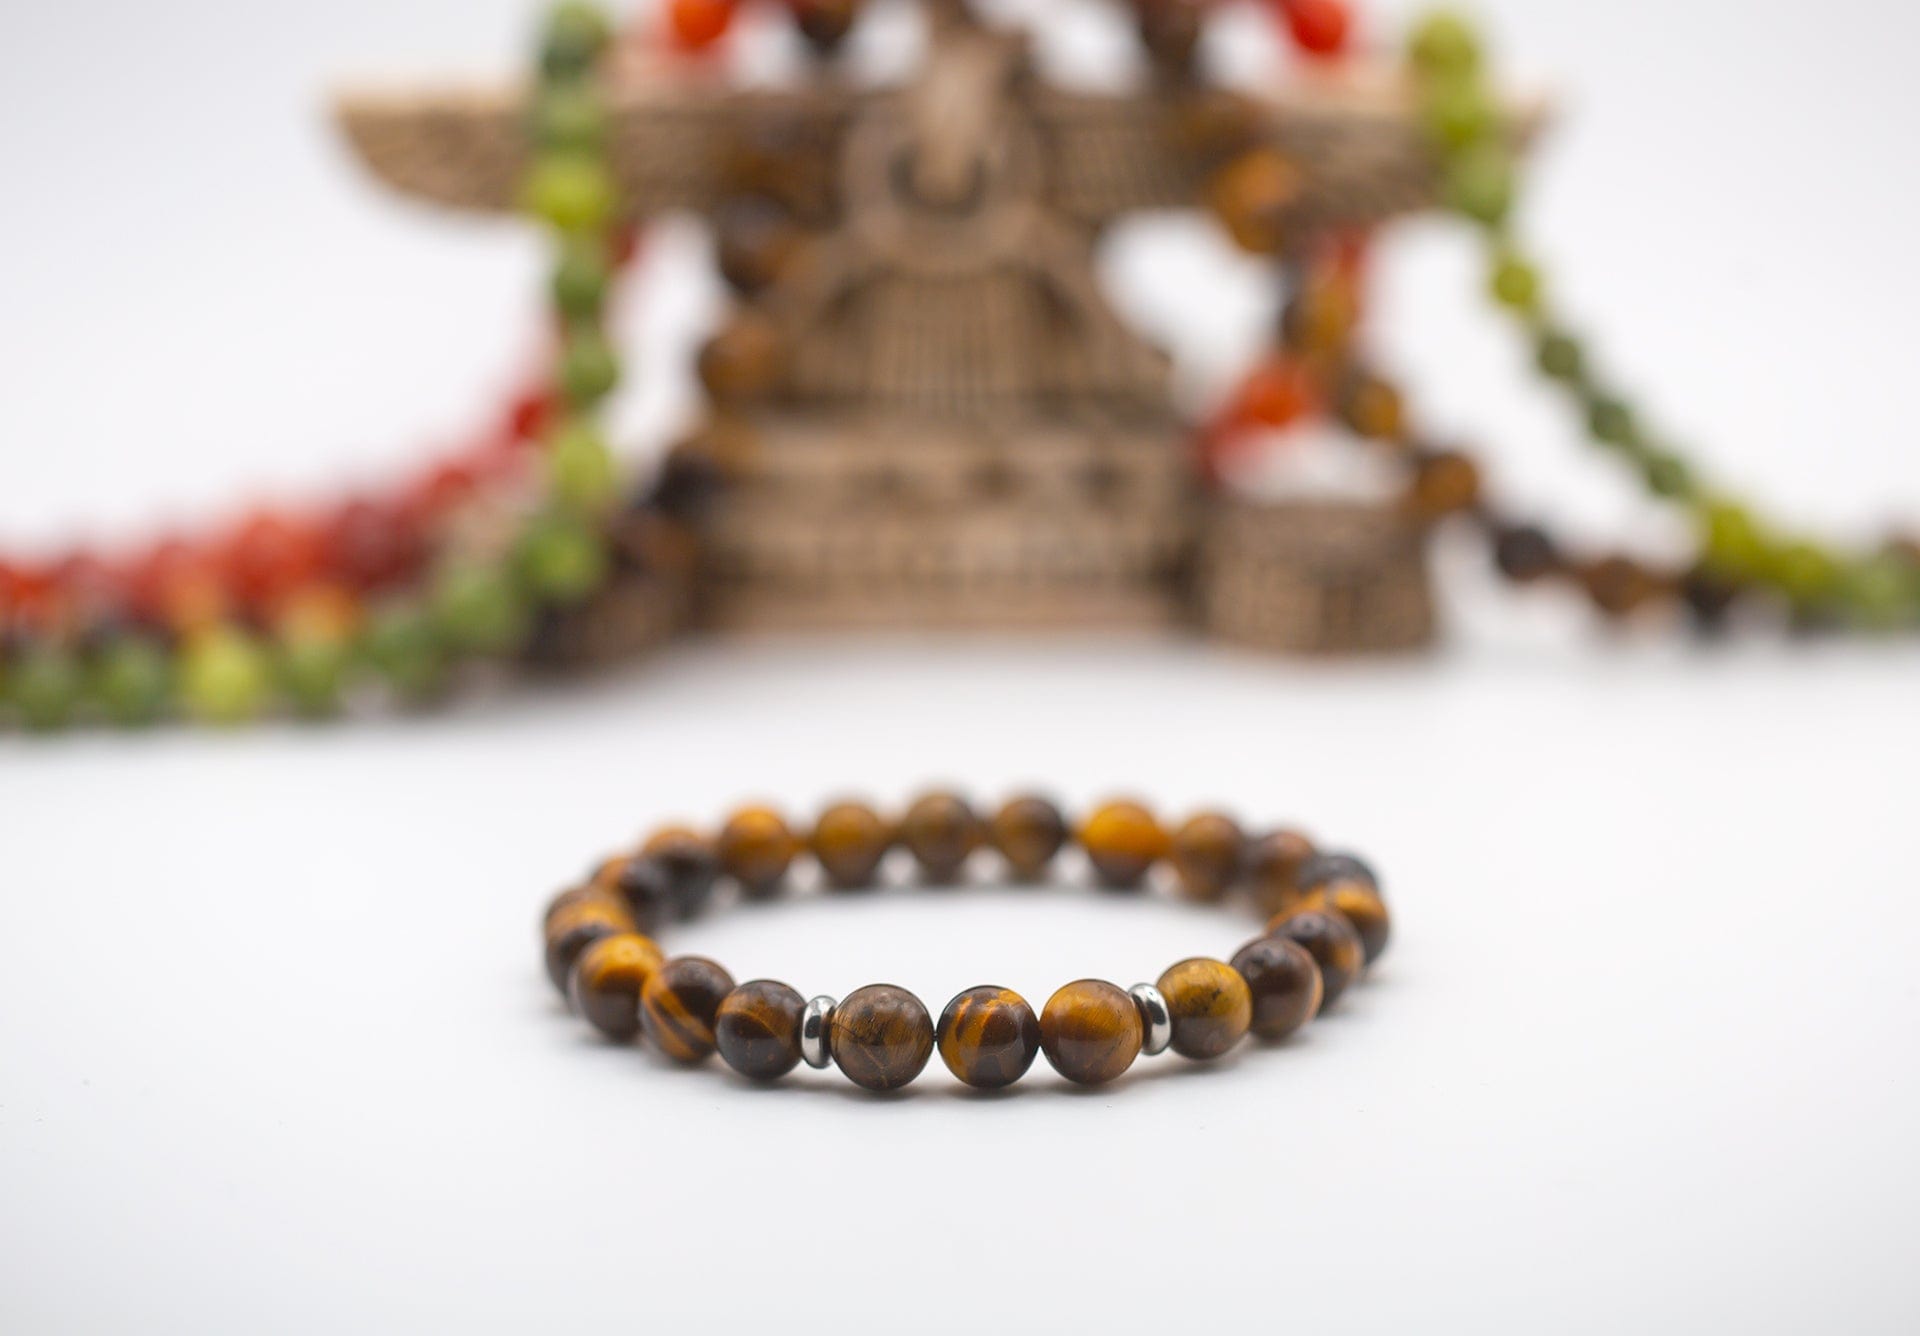 Thebeadchest Matte Tiger Eye Beads (8mm): Organic Gemstone Round Spherical Energy Stone Healing Power Crystal for Jewelry Bracelet Mala Necklace